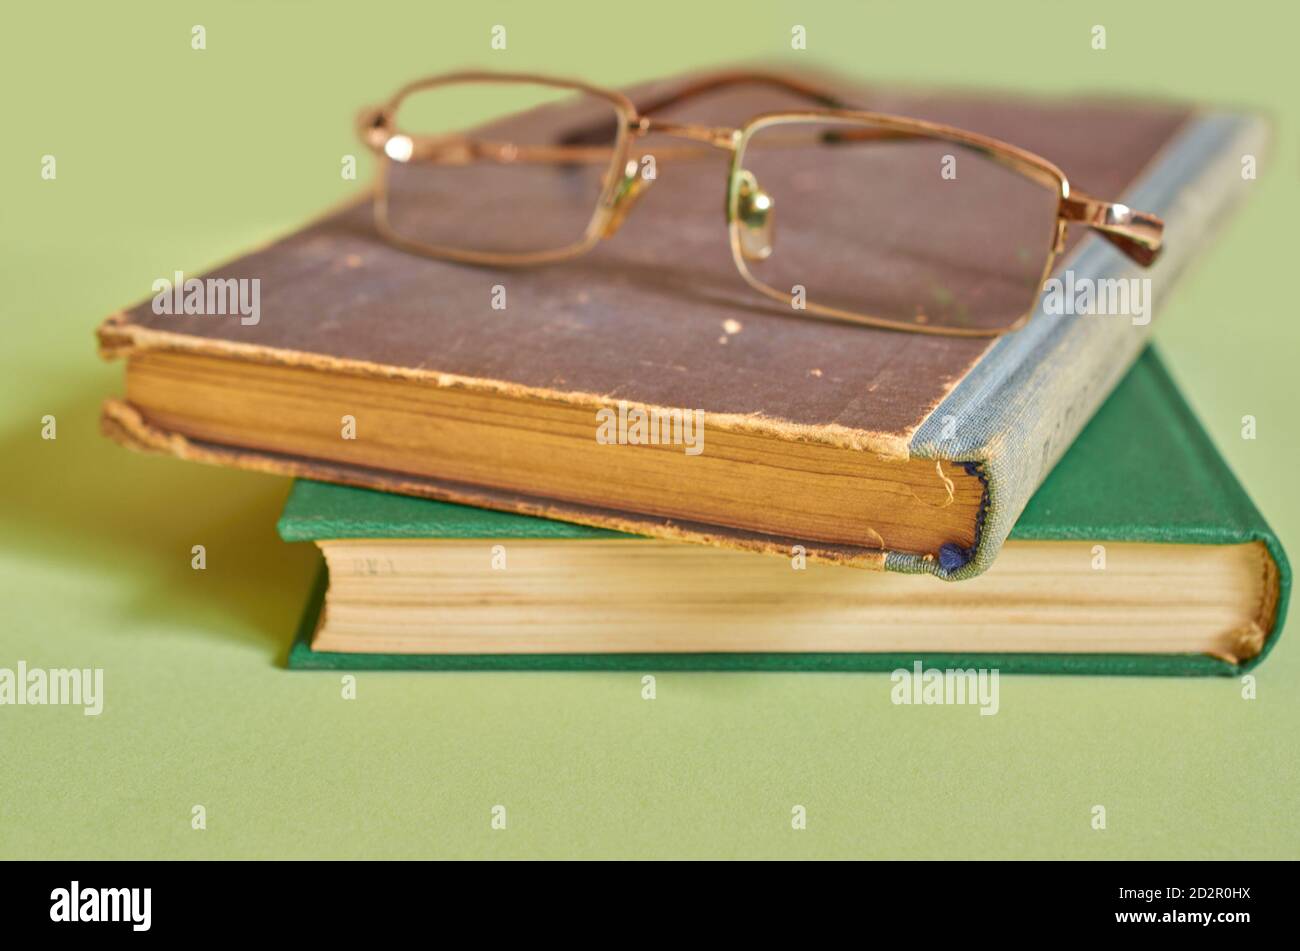 The glasses are on top of a stack of old books. Close-up, macro Stock Photo